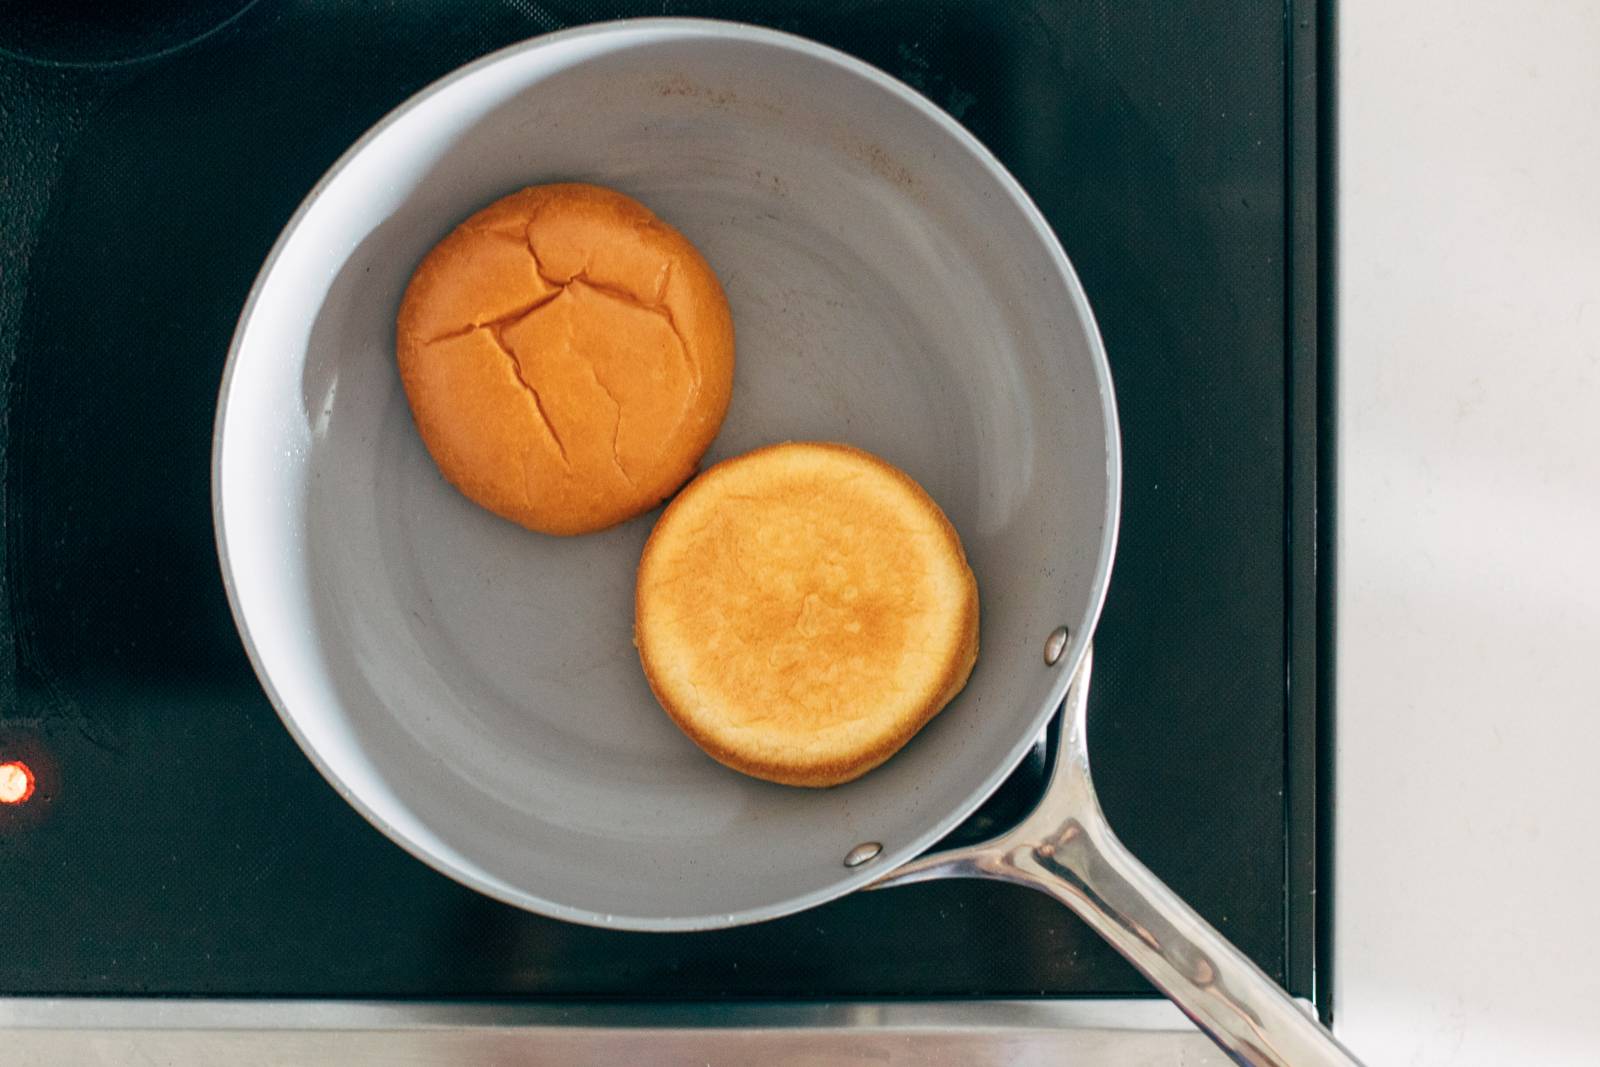 Toasting brioche buns in a pan on the stove.